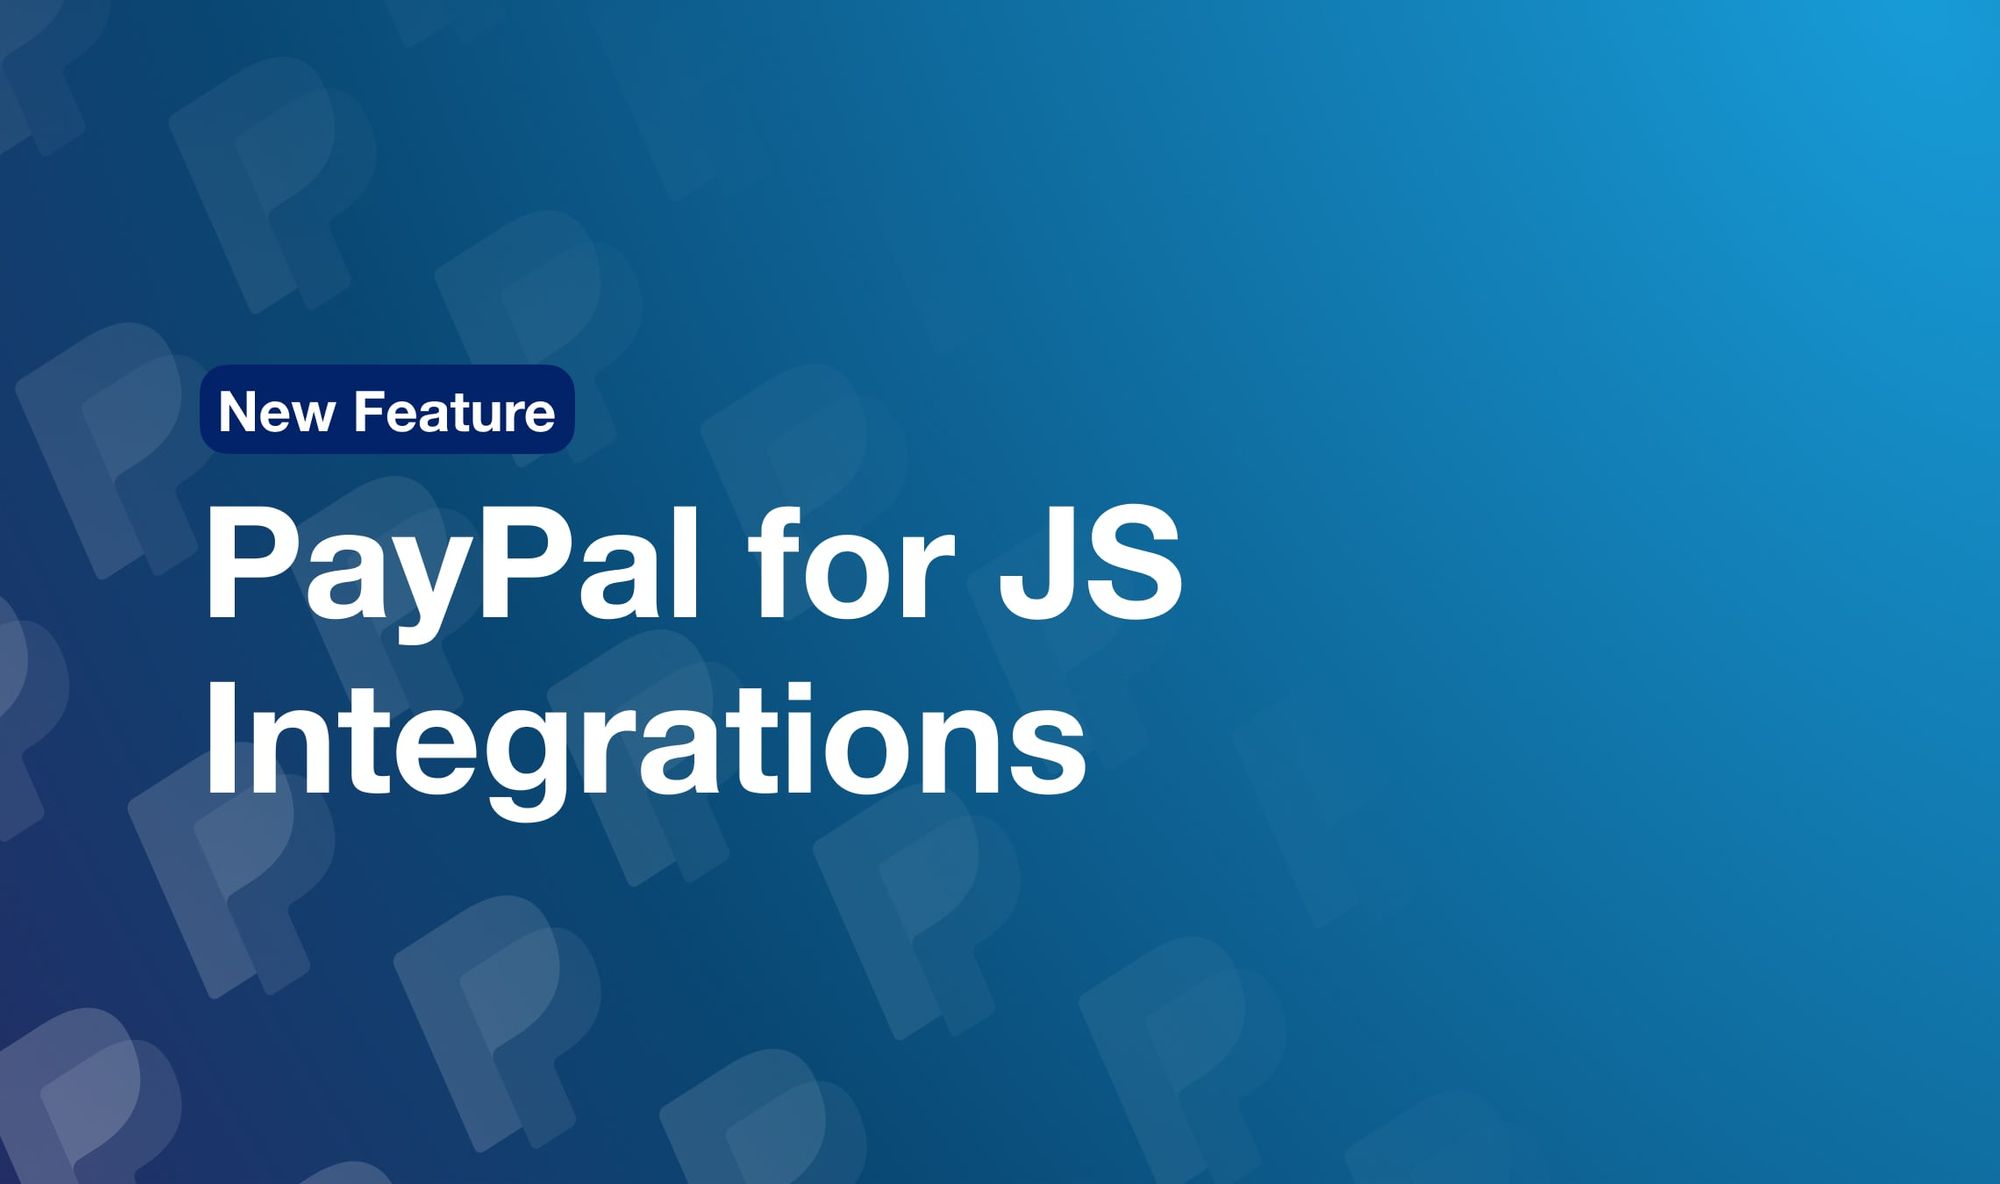 PayPal for JS Integrations